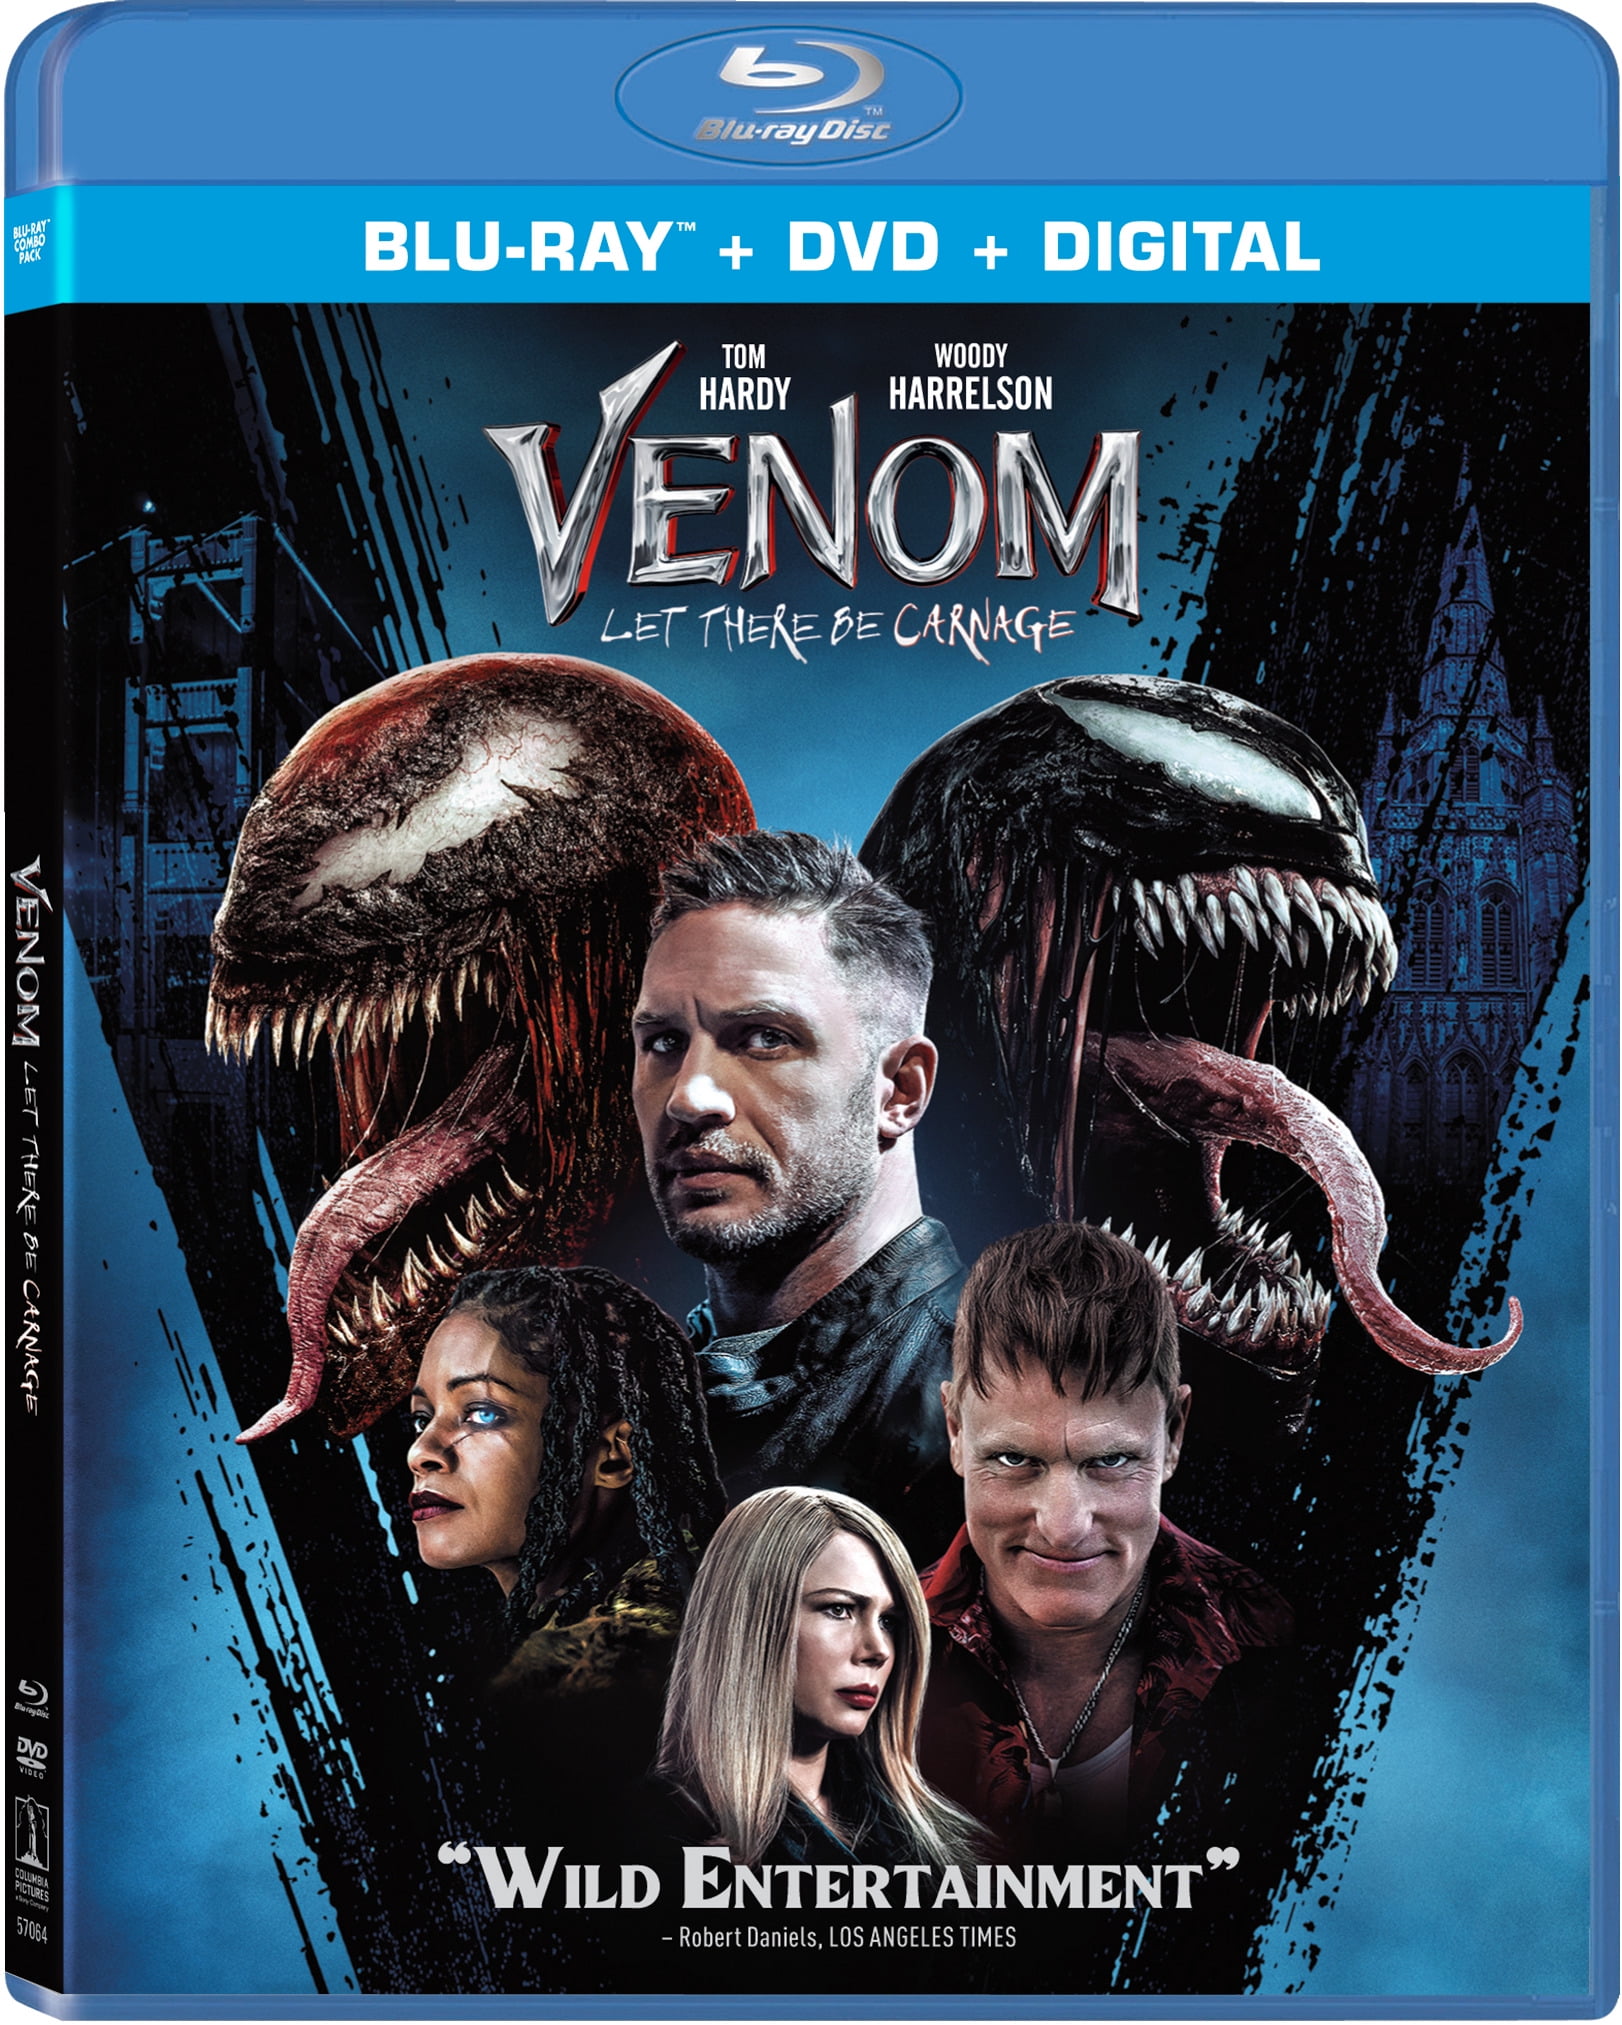 Sony Pictures Entertainment Venom: Let There Be Carnage (Blu-ray / DVD + Digital Copy)